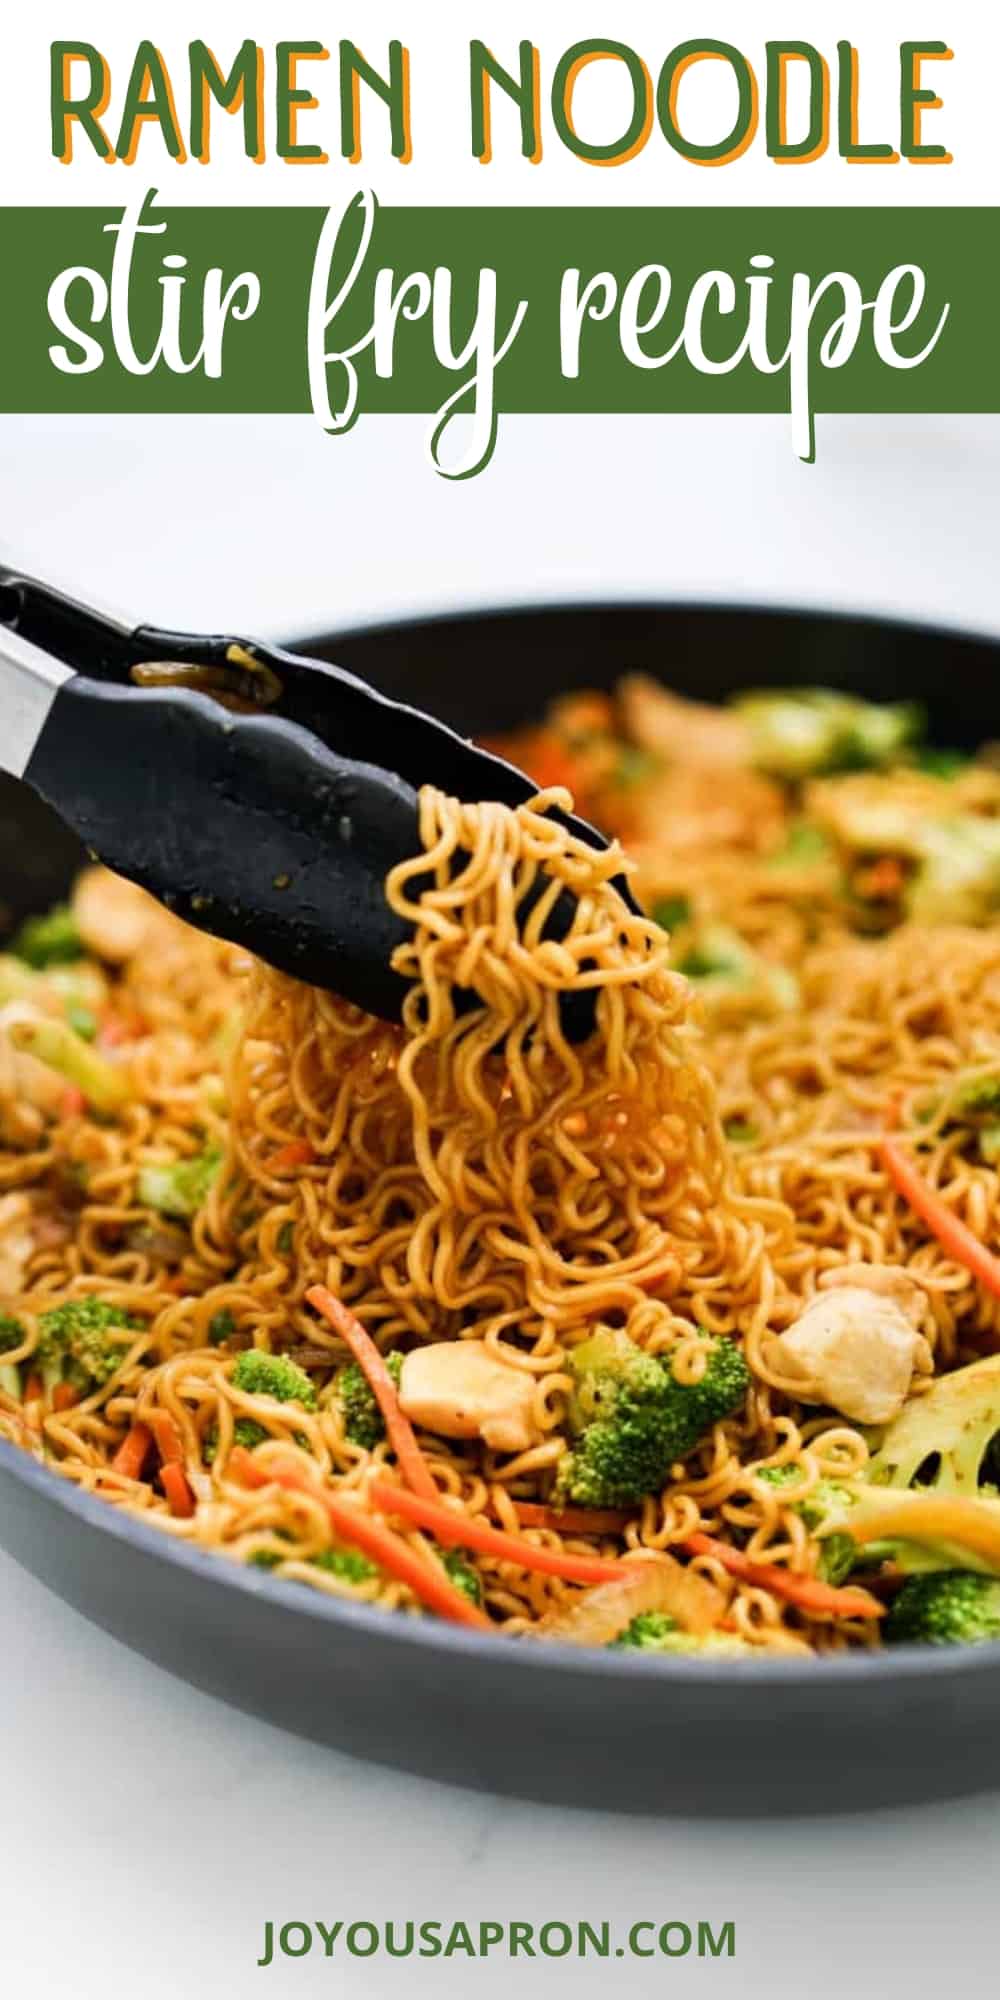 Ramen Noodle Stir Fry - Easy and flavorful Asian noodle dish tossed with chicken, vegetable and a delicious sauce! 30 minutes only and so delicious! Perfect for busy weeknights and makes great leftover and meal prep! via @joyousapron